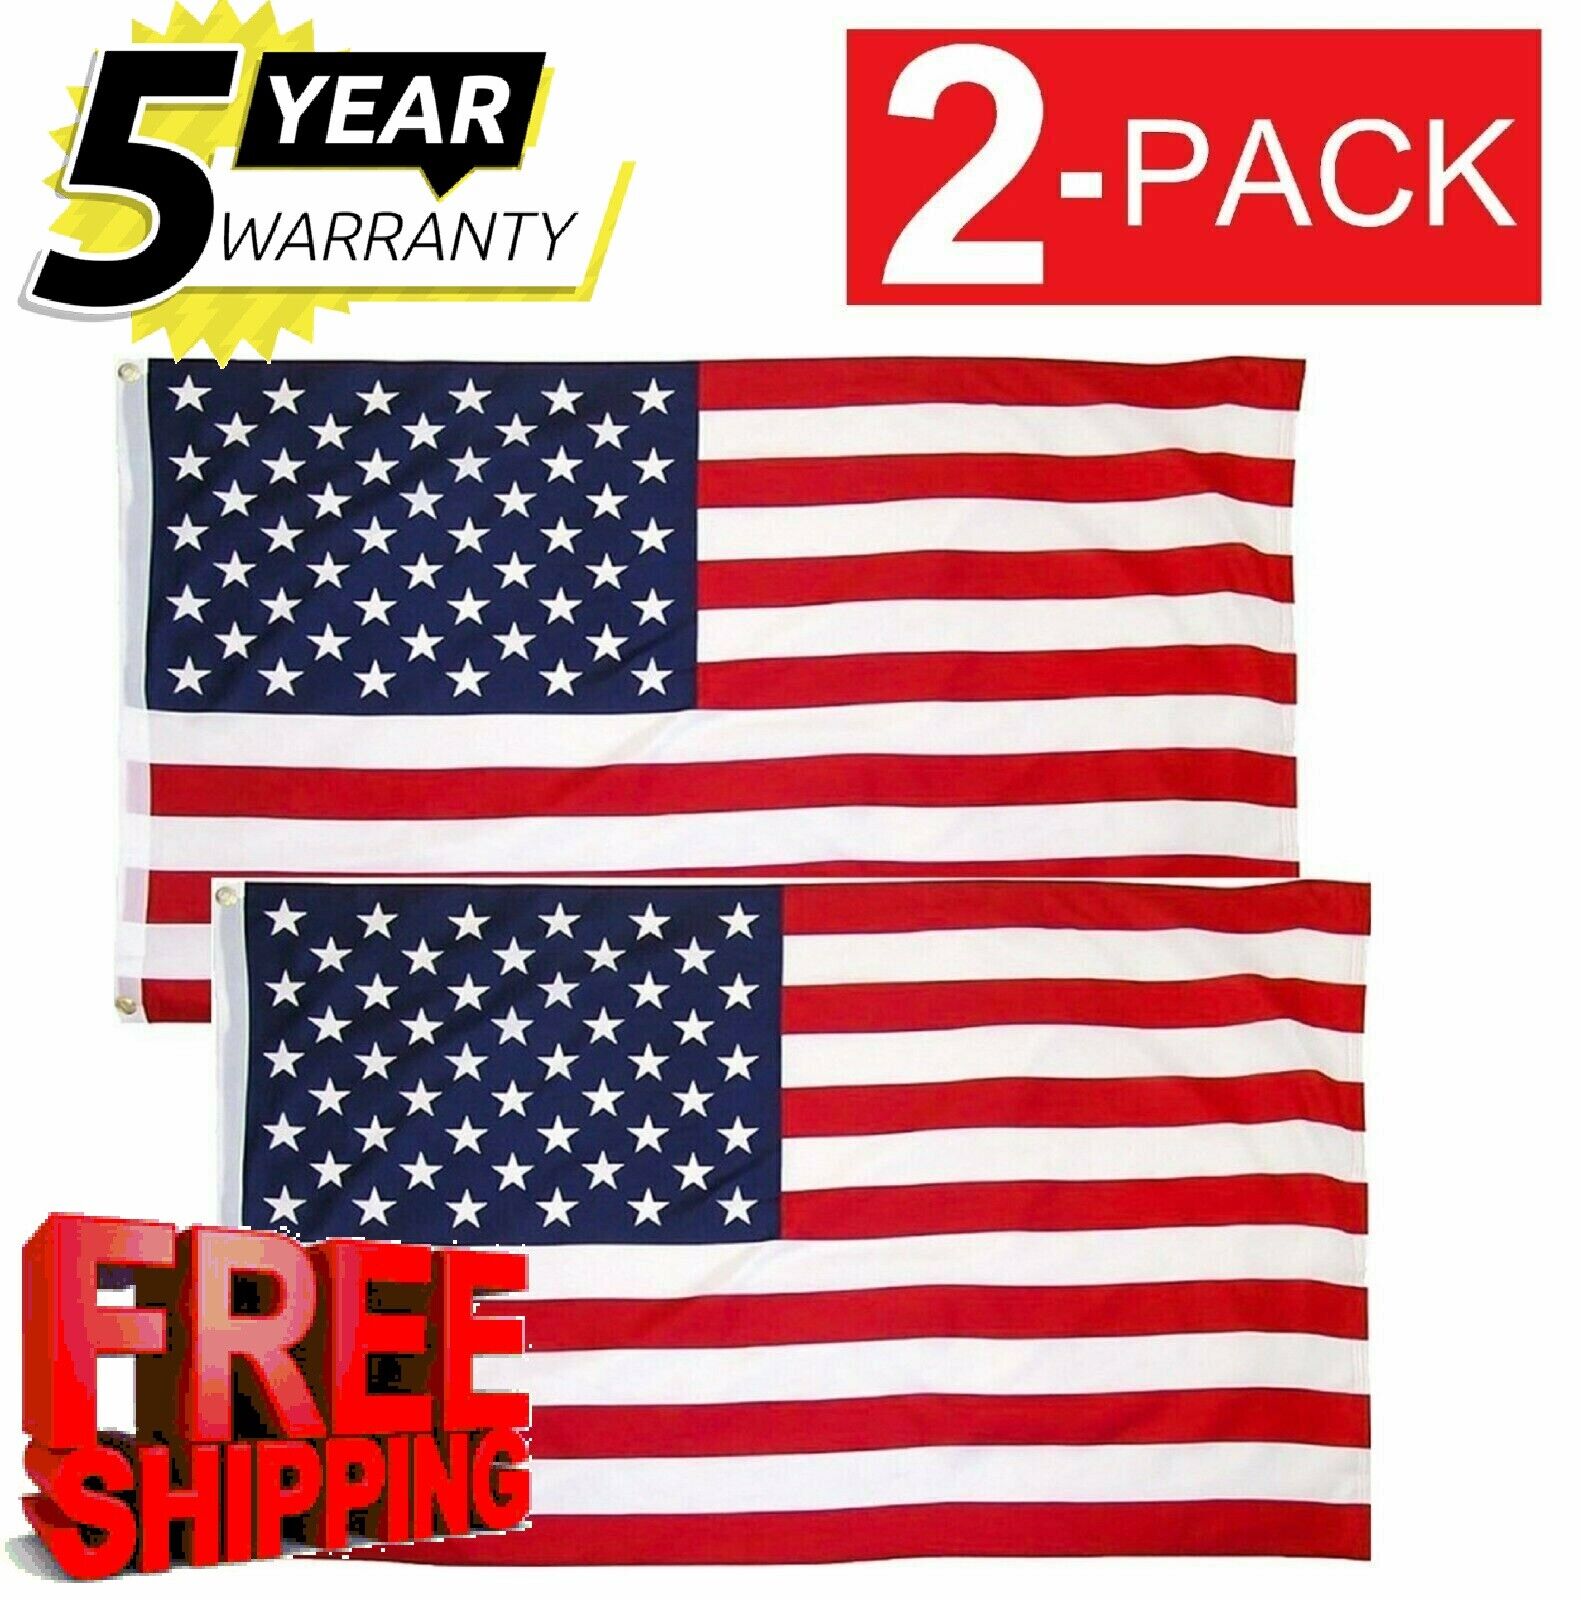 2x3 American Flag w/ Grommets USA United States of America US Flags 2 Pack